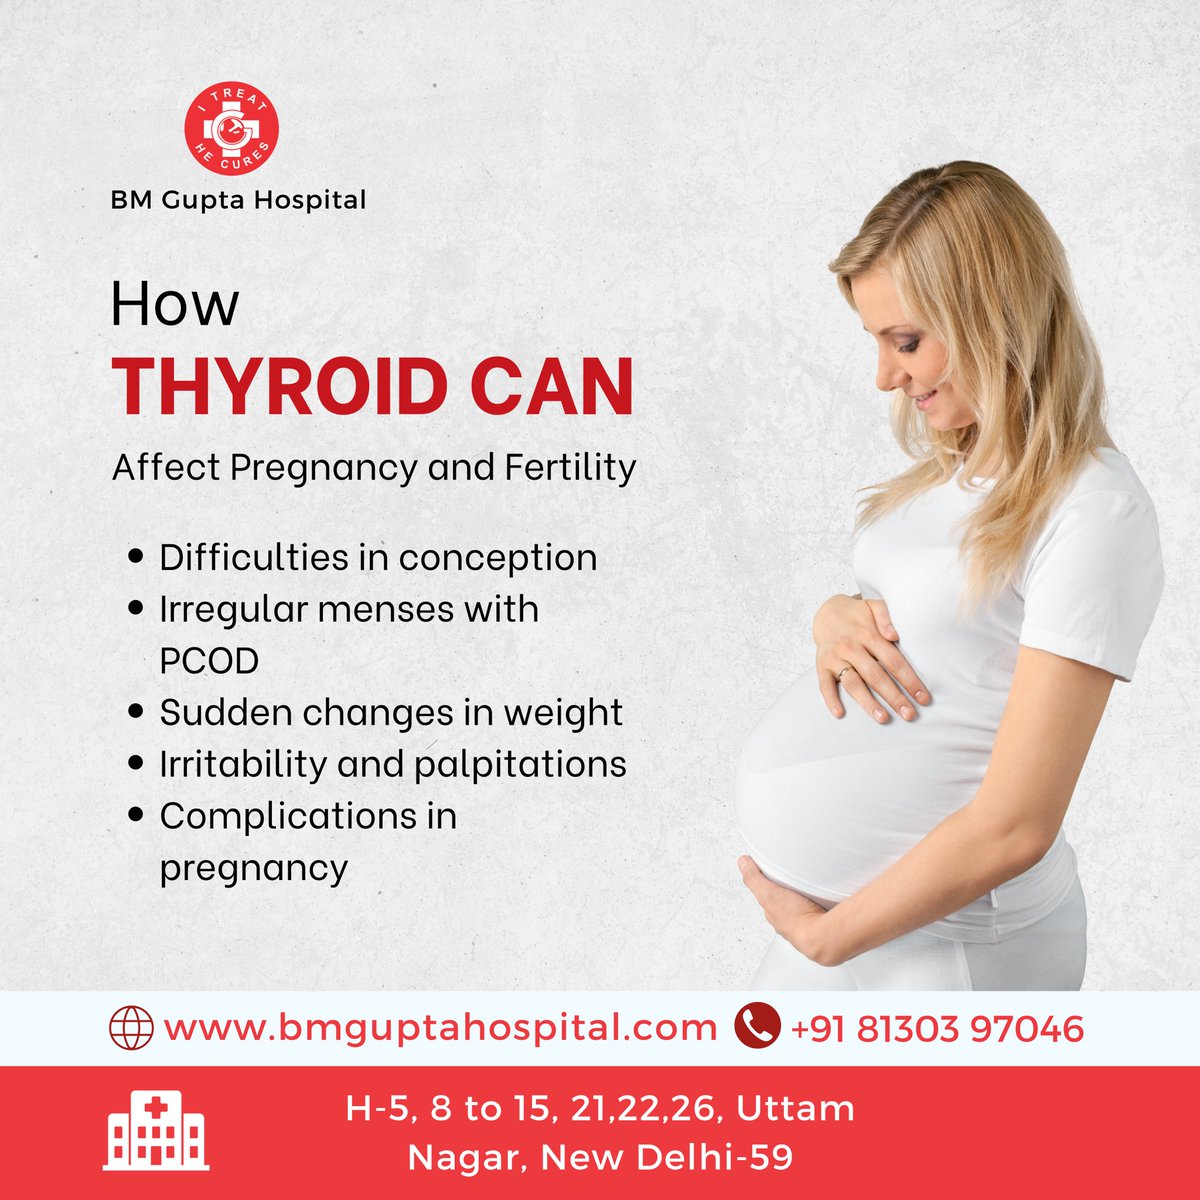 How thyroid can affect pregnancy and fertility.
For more info 
Call us at  91 81303 97046
Mail us: bmguptagnh@gmail.com

#BMGH #BMGuptaHospital #health #healthcare #ThyroidHealth #FertilityIssues #PregnancyComplications #PCODandThyroid #WeightFluctuations #ThyroidSymptoms